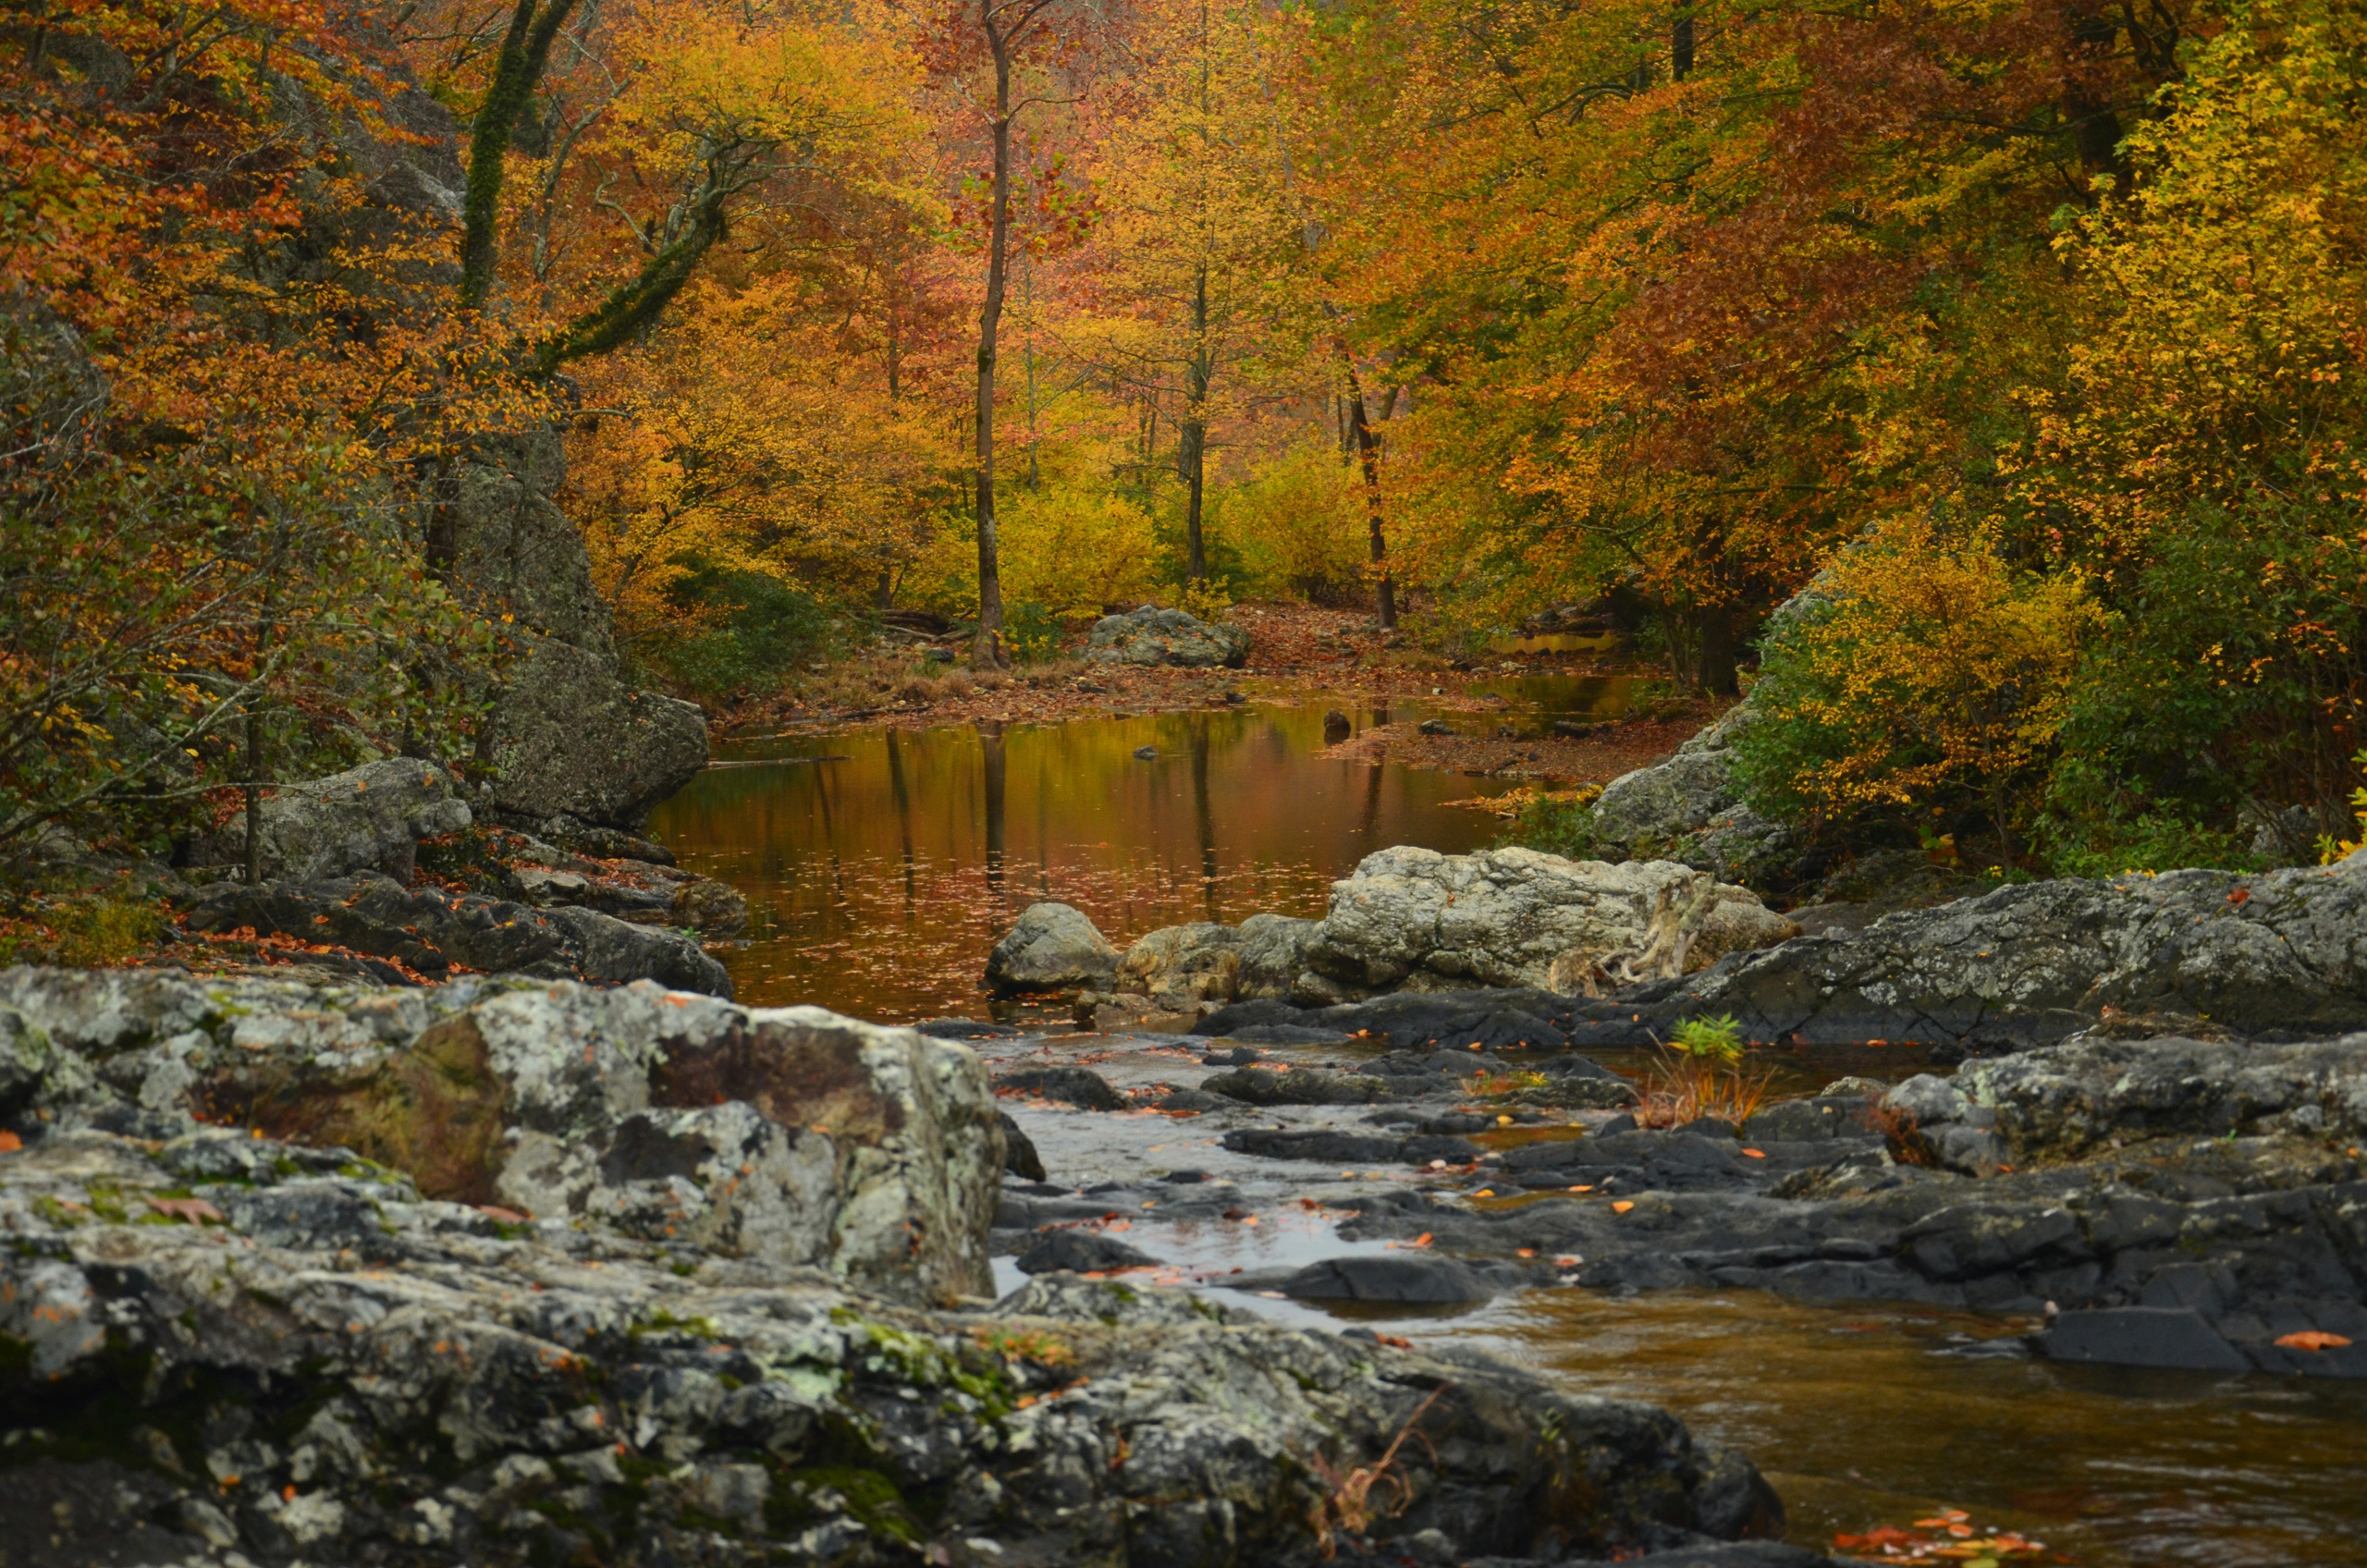 A river in an autumn forest